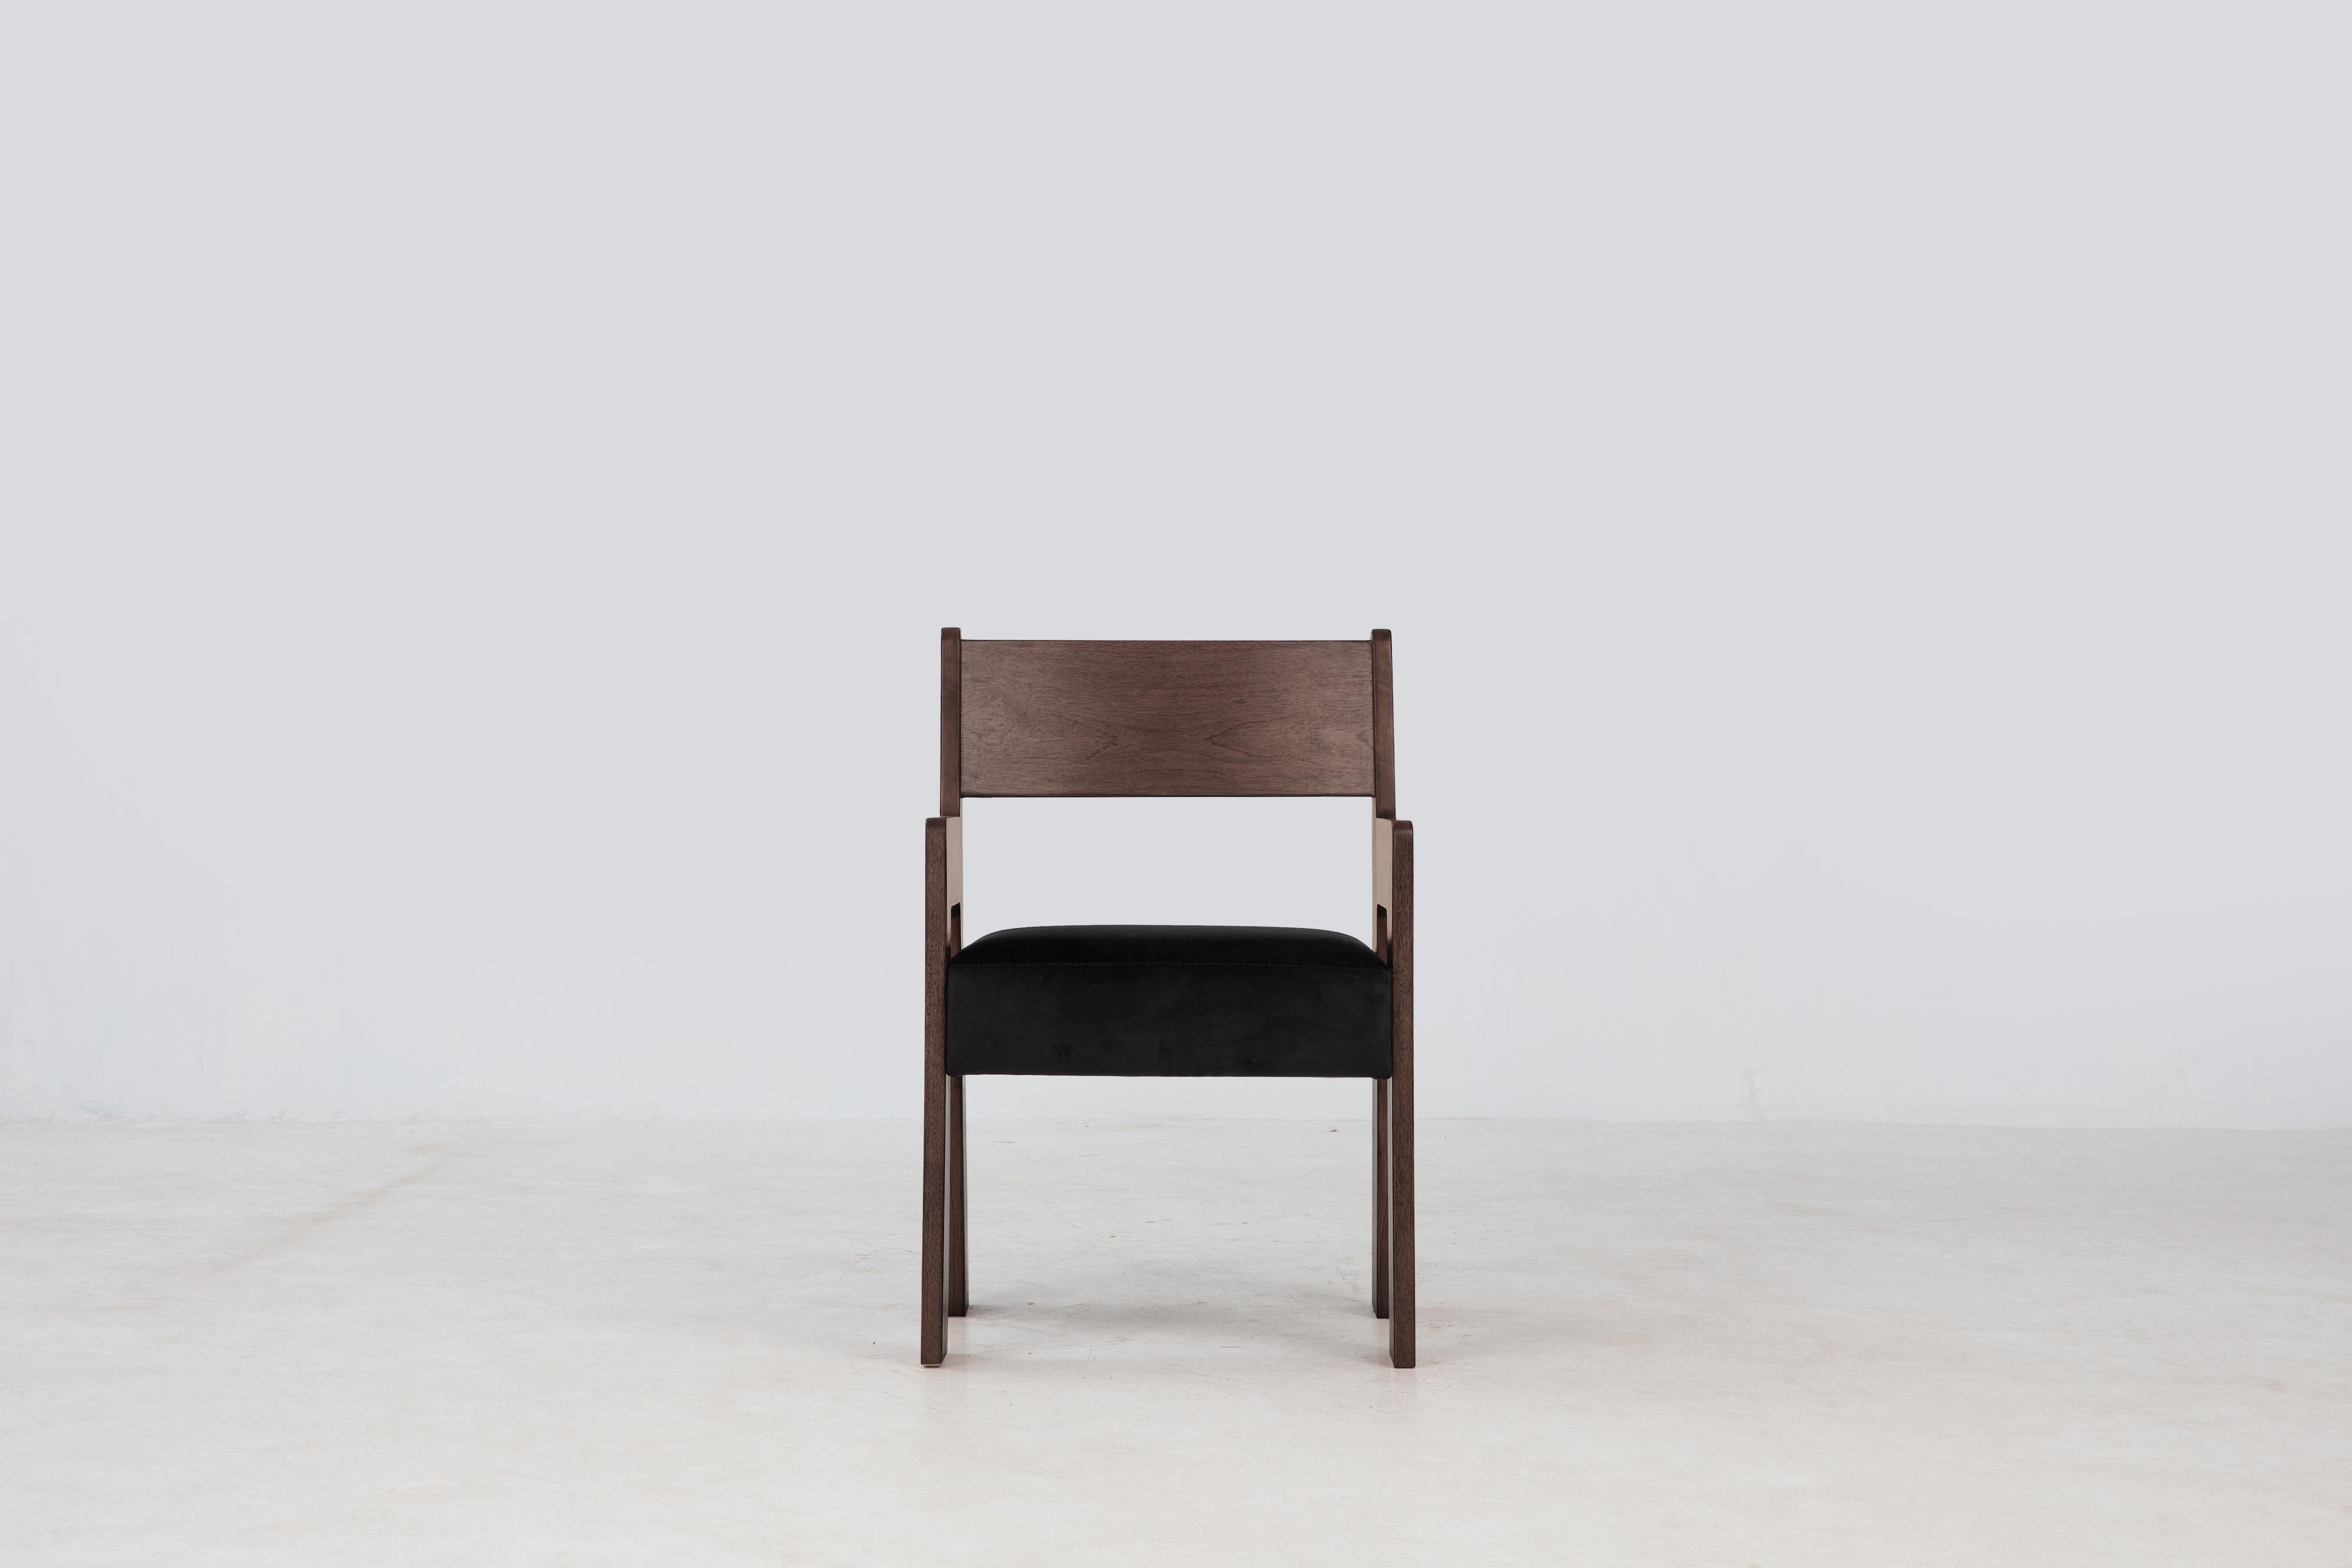 The Reka Armchair spotlights contrasting width. In designing the chair, we played with wide and narrow, thick and thin: the legs are wide and flat along one axis, thin along the other, while the seat cushion was elongated and fattened vertically. We